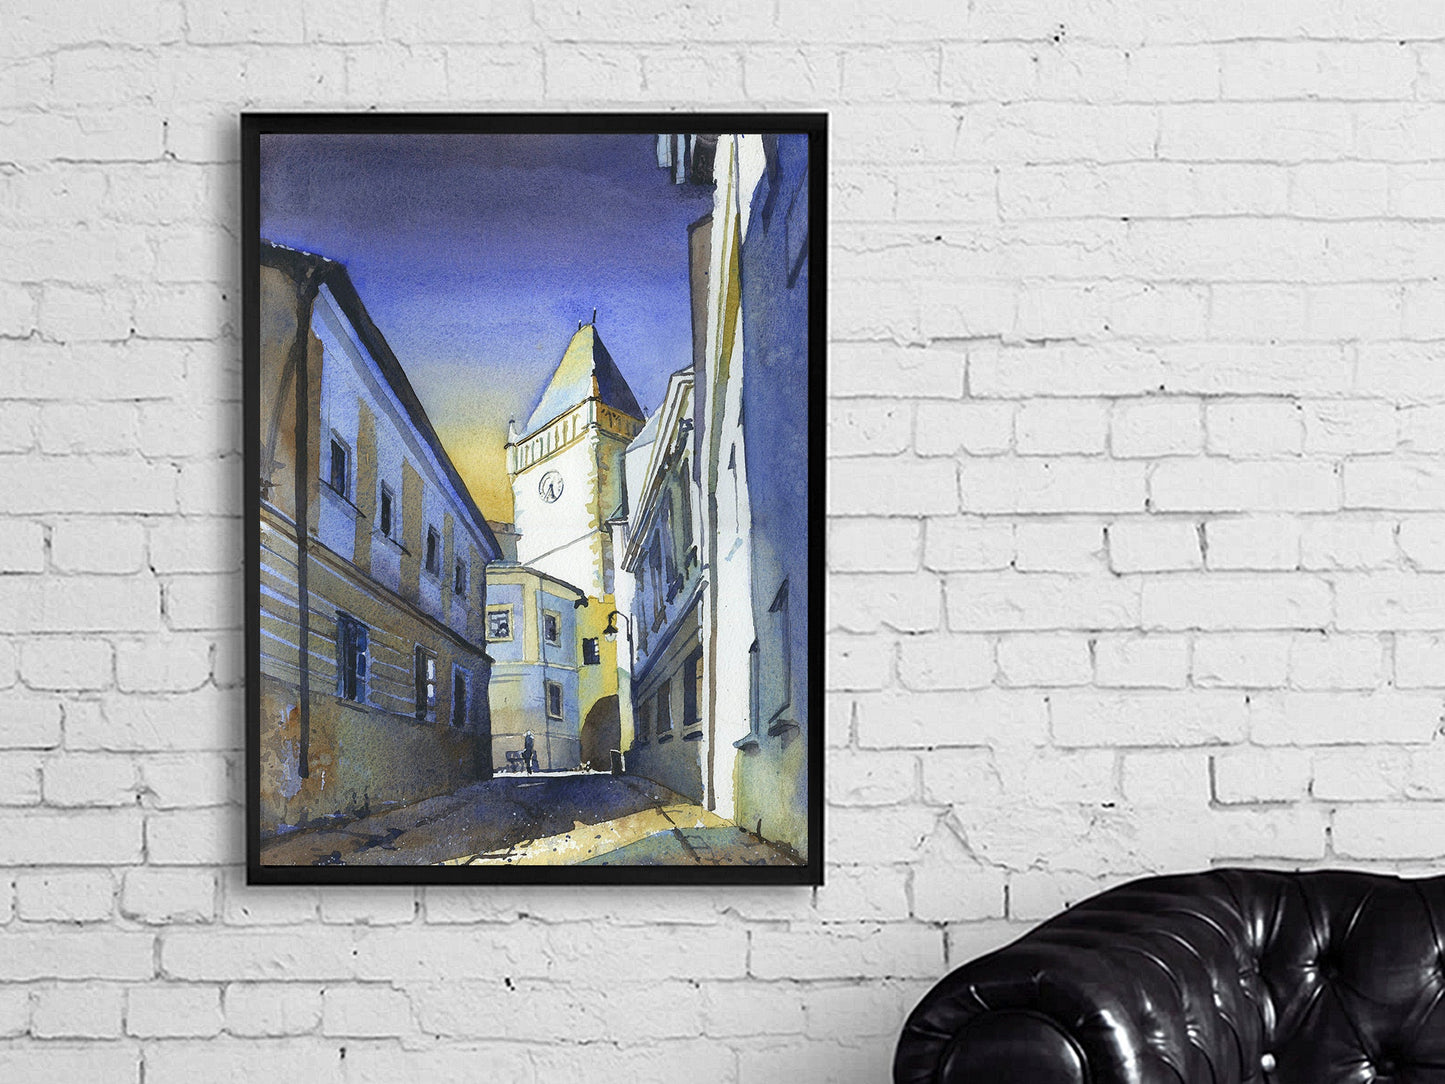 Tabor, Czech Republich belltower.  Watercolor painting of belltower in medieval village of Tabor skyline fine art watercolor painting print